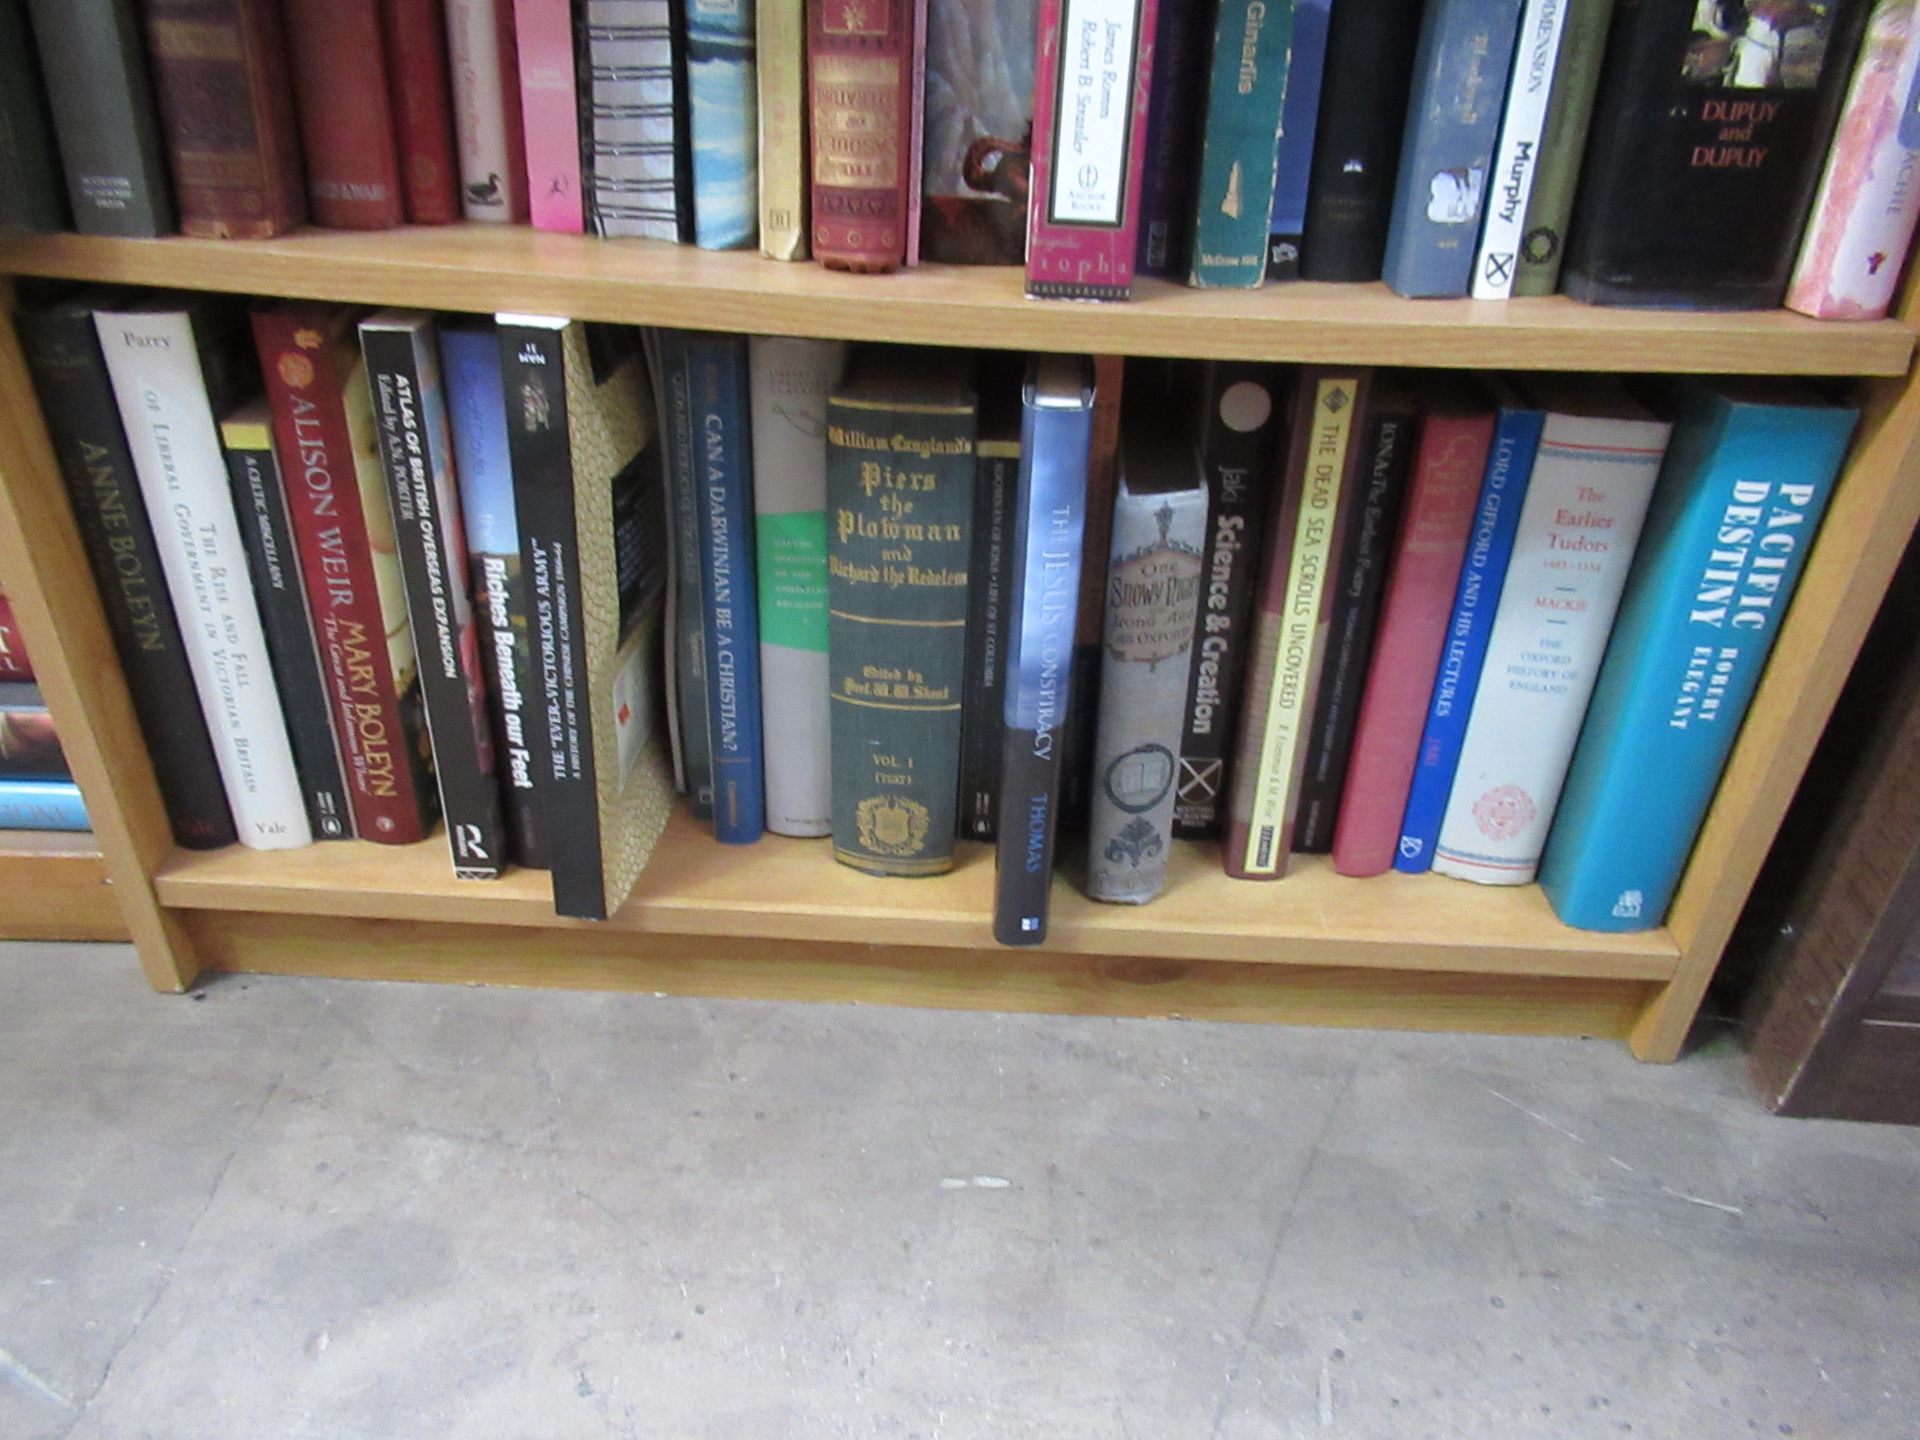 3x Bookcases and cabinates of various themes and subjects including naval, religion, fiction etc als - Image 6 of 15